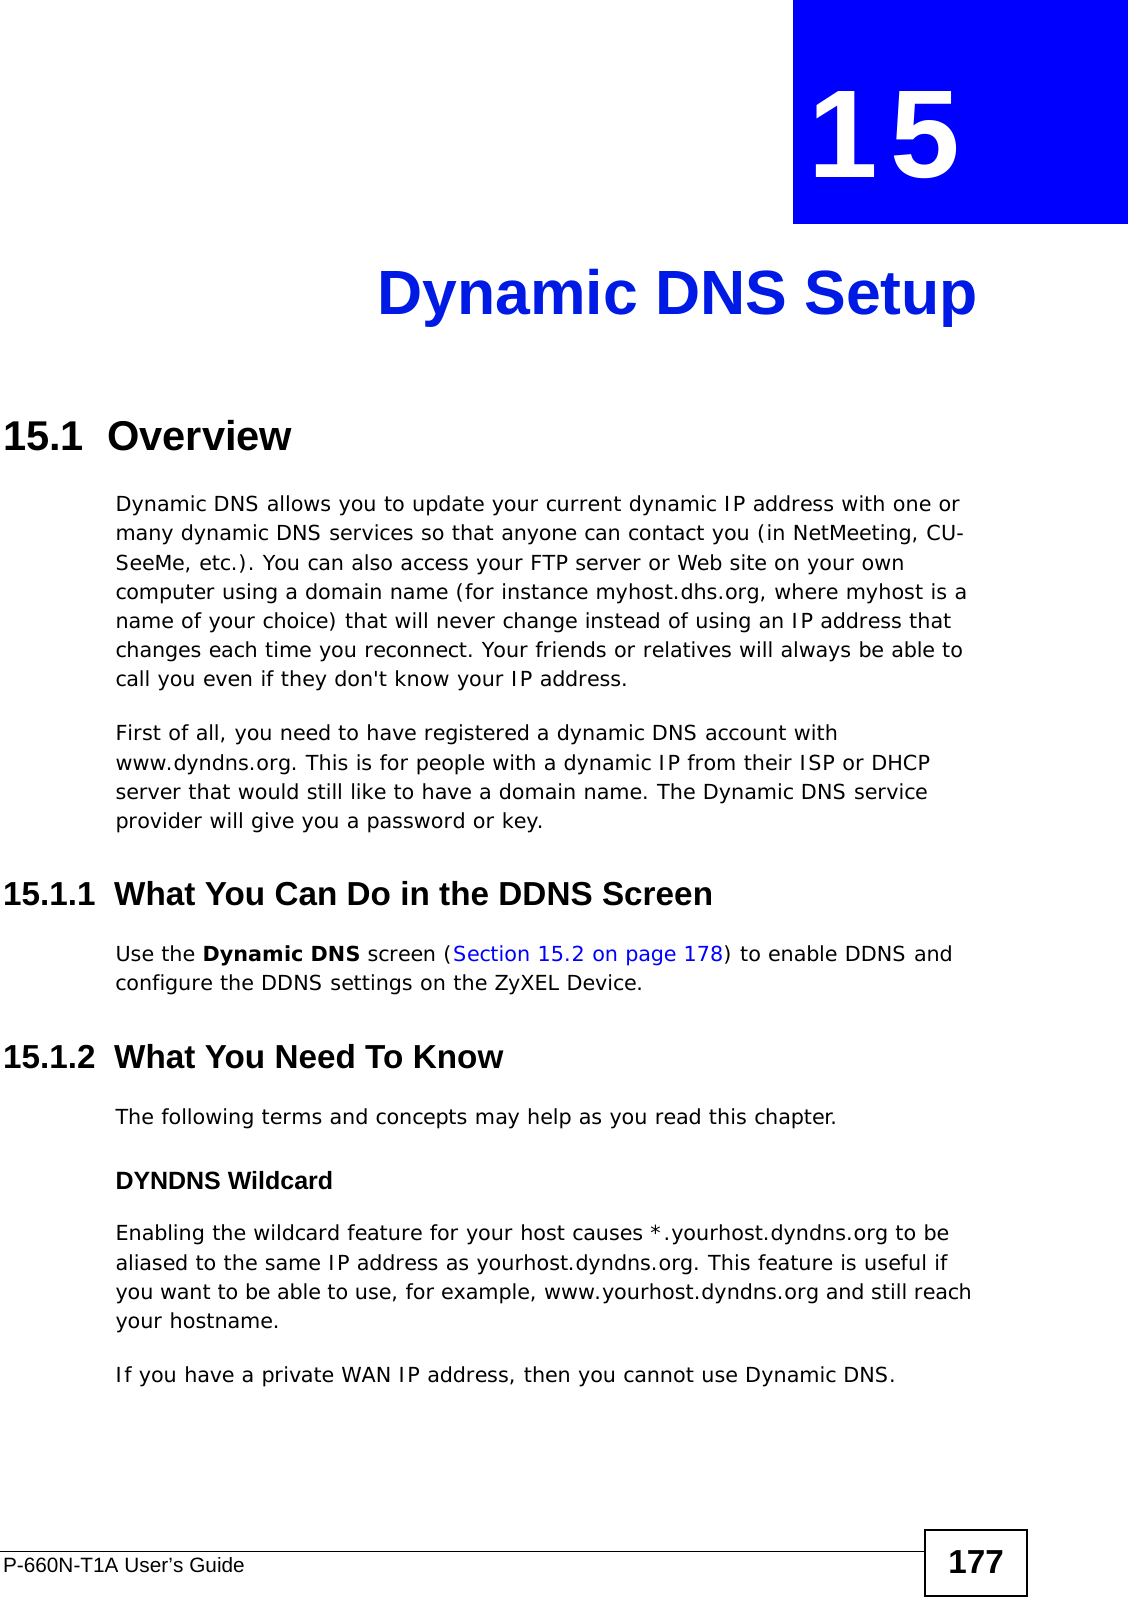 P-660N-T1A User’s Guide 177CHAPTER  15 Dynamic DNS Setup15.1  Overview Dynamic DNS allows you to update your current dynamic IP address with one or many dynamic DNS services so that anyone can contact you (in NetMeeting, CU-SeeMe, etc.). You can also access your FTP server or Web site on your own computer using a domain name (for instance myhost.dhs.org, where myhost is a name of your choice) that will never change instead of using an IP address that changes each time you reconnect. Your friends or relatives will always be able to call you even if they don&apos;t know your IP address.First of all, you need to have registered a dynamic DNS account with www.dyndns.org. This is for people with a dynamic IP from their ISP or DHCP server that would still like to have a domain name. The Dynamic DNS service provider will give you a password or key. 15.1.1  What You Can Do in the DDNS ScreenUse the Dynamic DNS screen (Section 15.2 on page 178) to enable DDNS and configure the DDNS settings on the ZyXEL Device.15.1.2  What You Need To KnowThe following terms and concepts may help as you read this chapter.DYNDNS WildcardEnabling the wildcard feature for your host causes *.yourhost.dyndns.org to be aliased to the same IP address as yourhost.dyndns.org. This feature is useful if you want to be able to use, for example, www.yourhost.dyndns.org and still reach your hostname.If you have a private WAN IP address, then you cannot use Dynamic DNS.